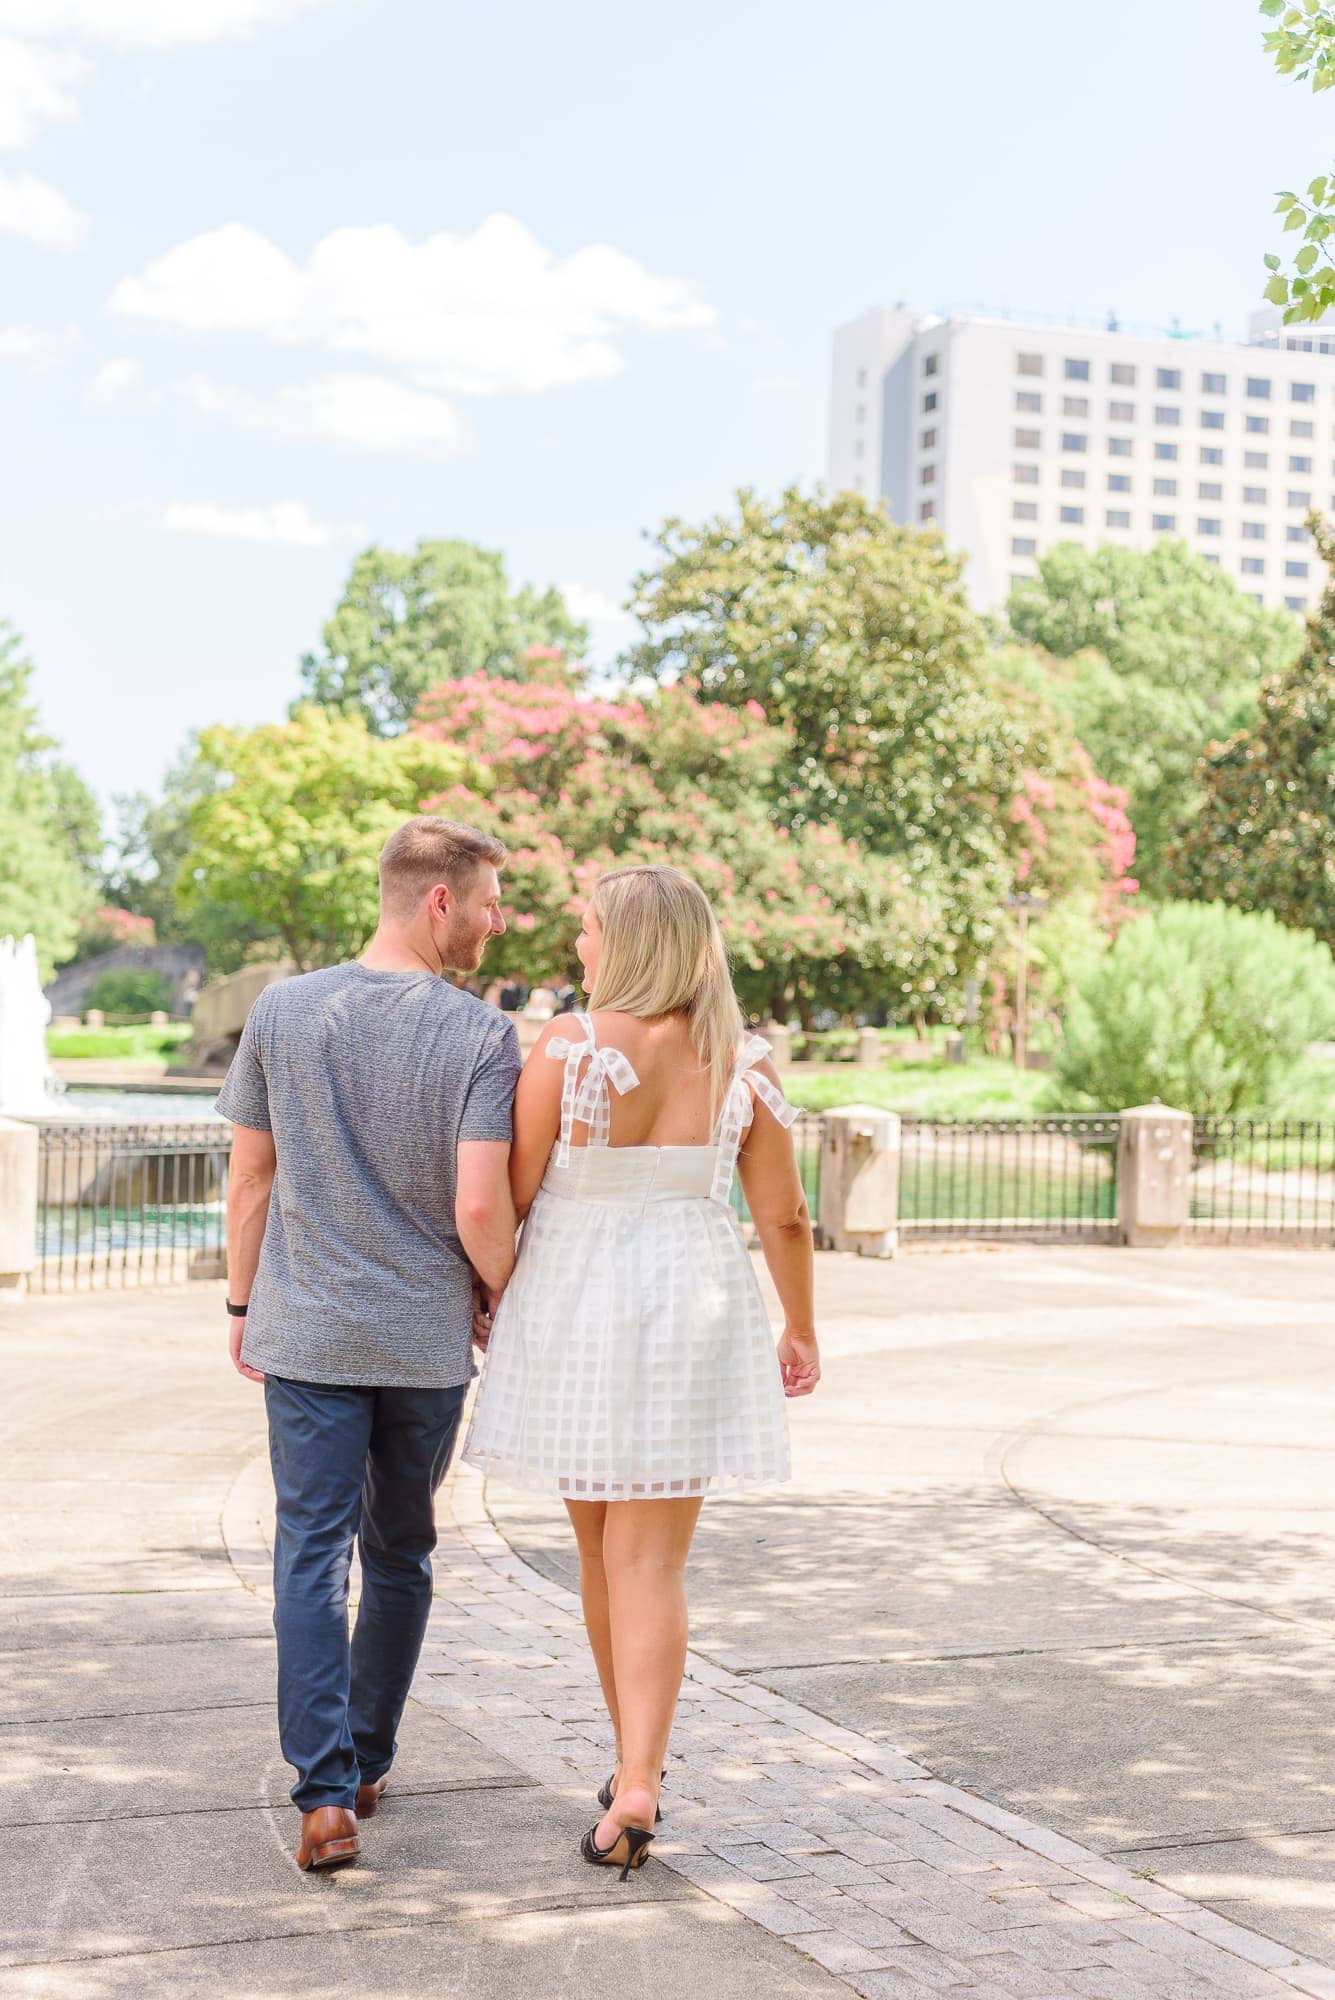 Corey and Heather walk hand in hand through Marshall Park in Charlotte.